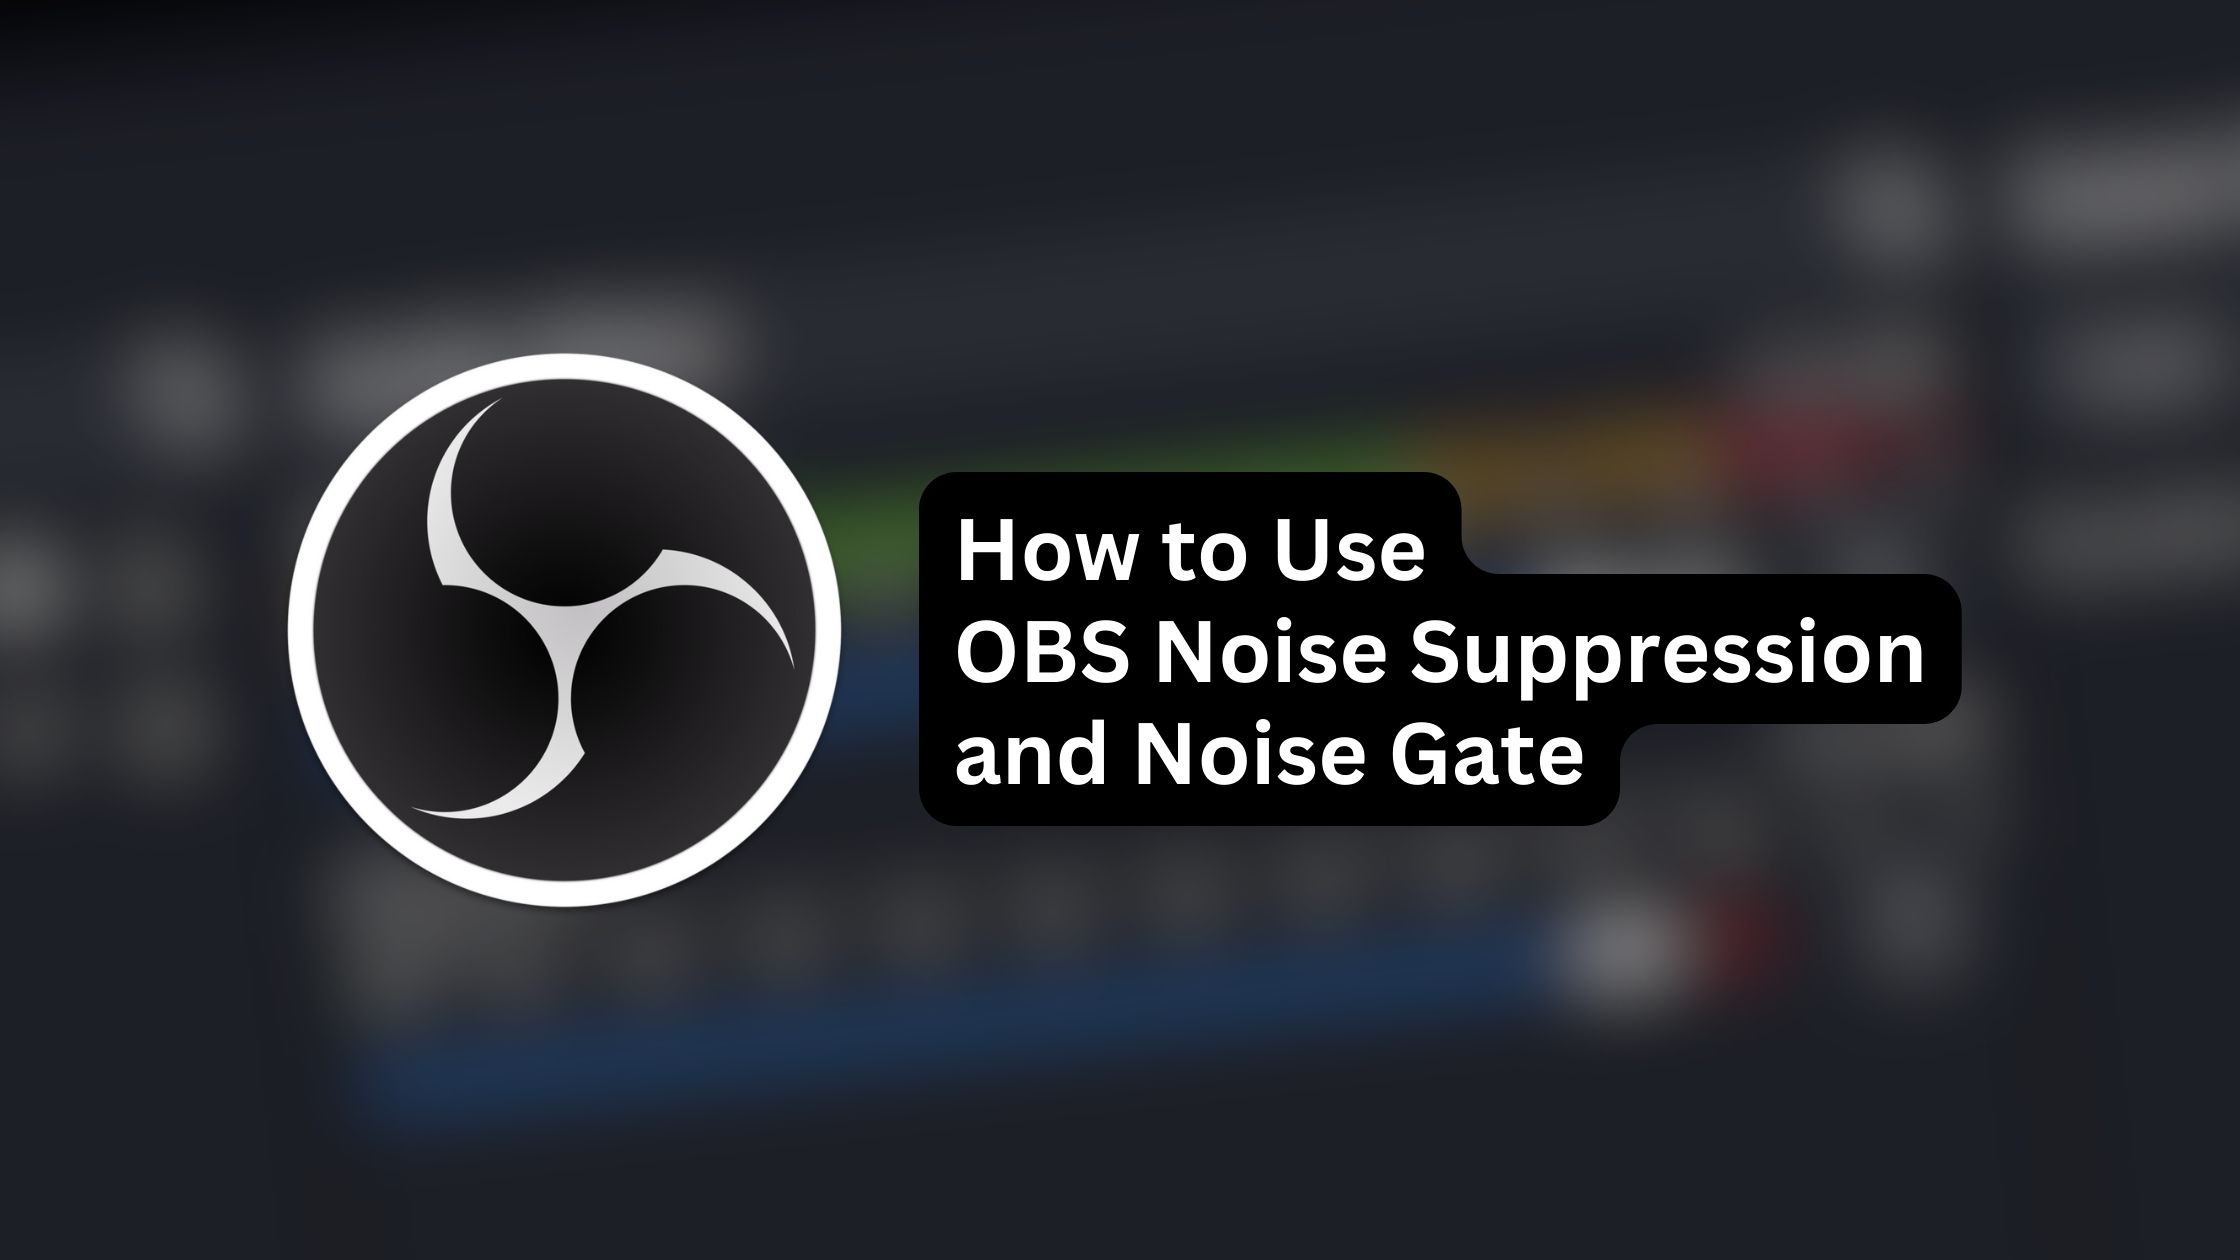 How to Use OBS Noise Suppression and Noise Gate